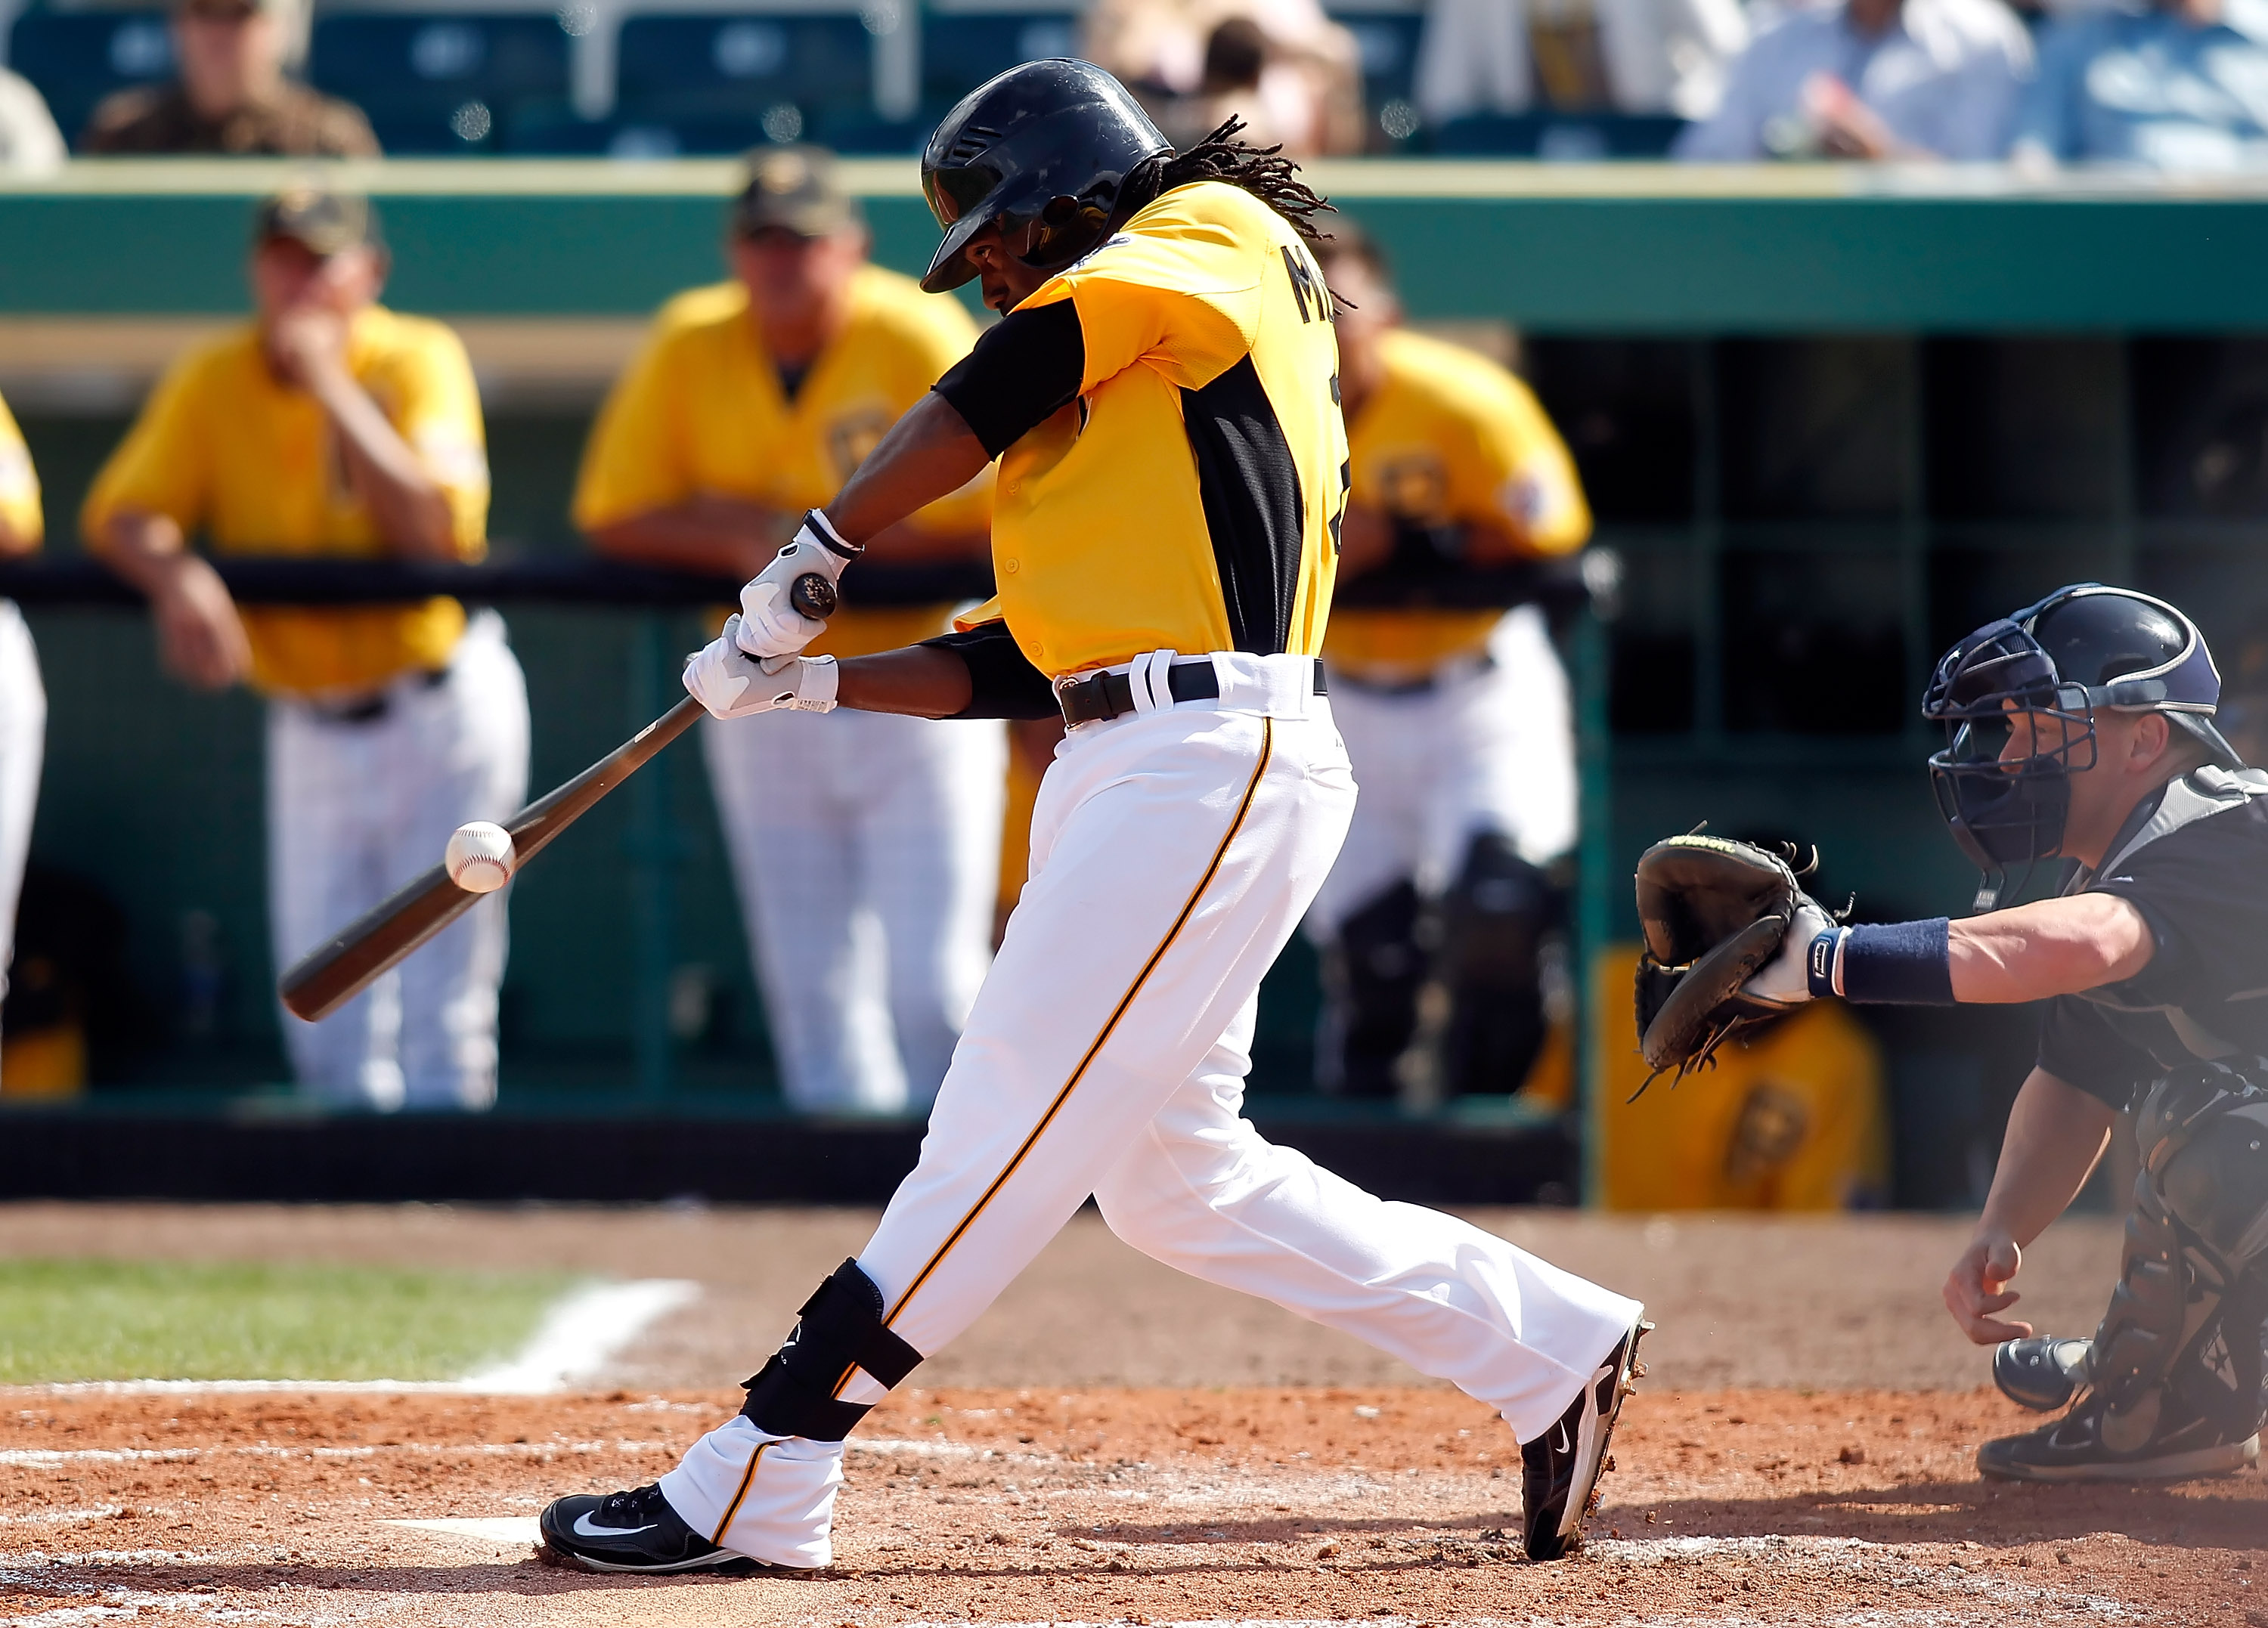 BRADENTON, FL - MARCH 02:  Outfielder Andrew McCutchen #22 of the Pittsburgh Pirates fouls off a pitch against the Minnesota Twins during a Grapefruit League Spring Training Game at McKechnie Field on March 2, 2011 in Bradenton, Florida.  (Photo by J. Mer